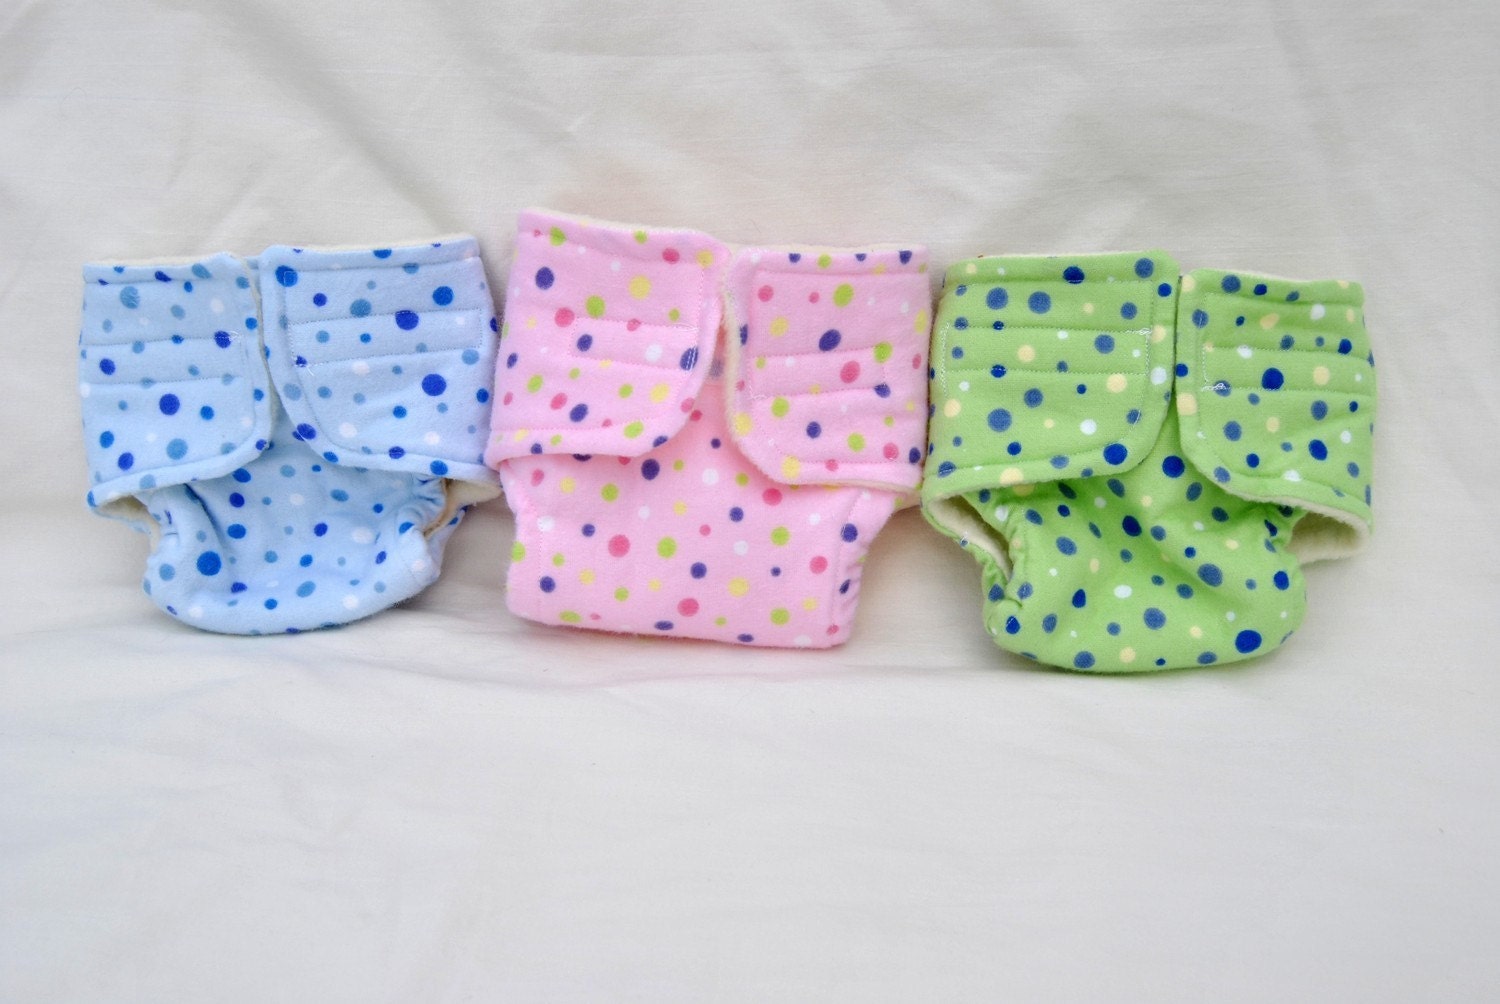 The Dot Collection - Flannel and Fleece Baby Doll Cloth Diapers - Set of three diapers